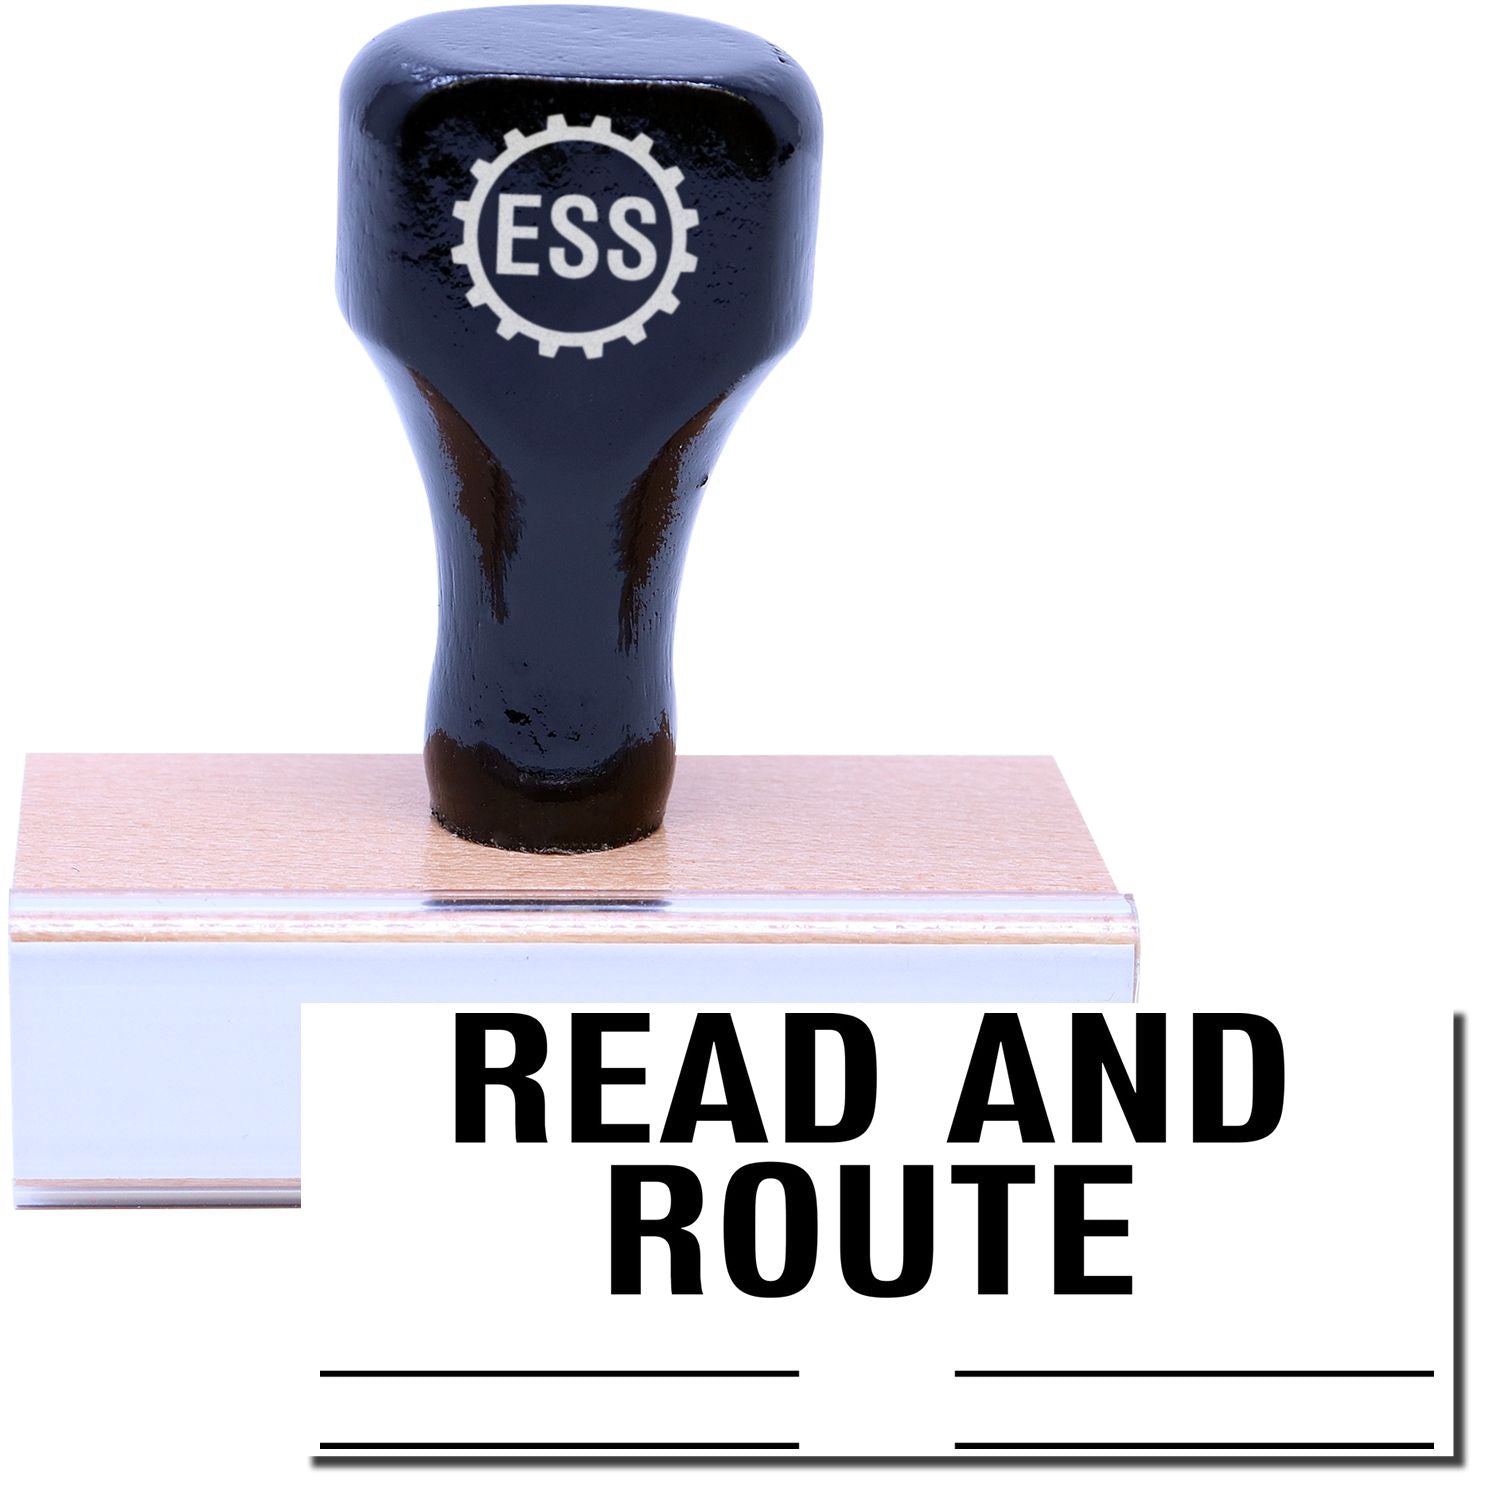 A stock office rubber stamp with a stamped image showing how the text "READ AND ROUTE" in a large font with lines underneath the text is displayed after stamping.